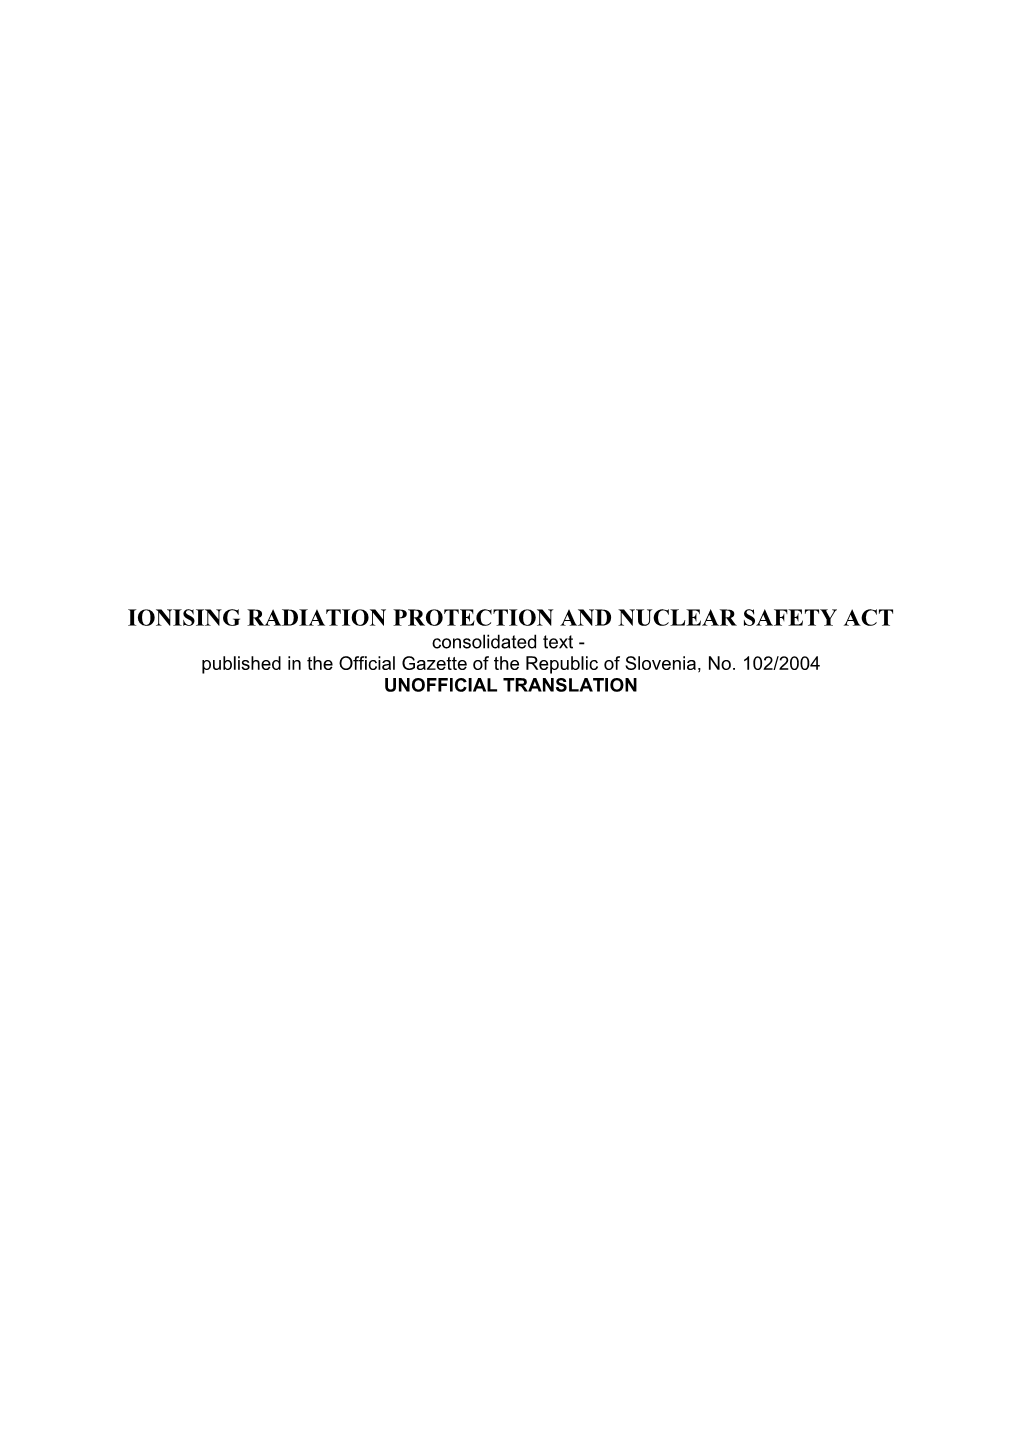 Act on Protection Against Ionising Radiation and Nuclear Safety